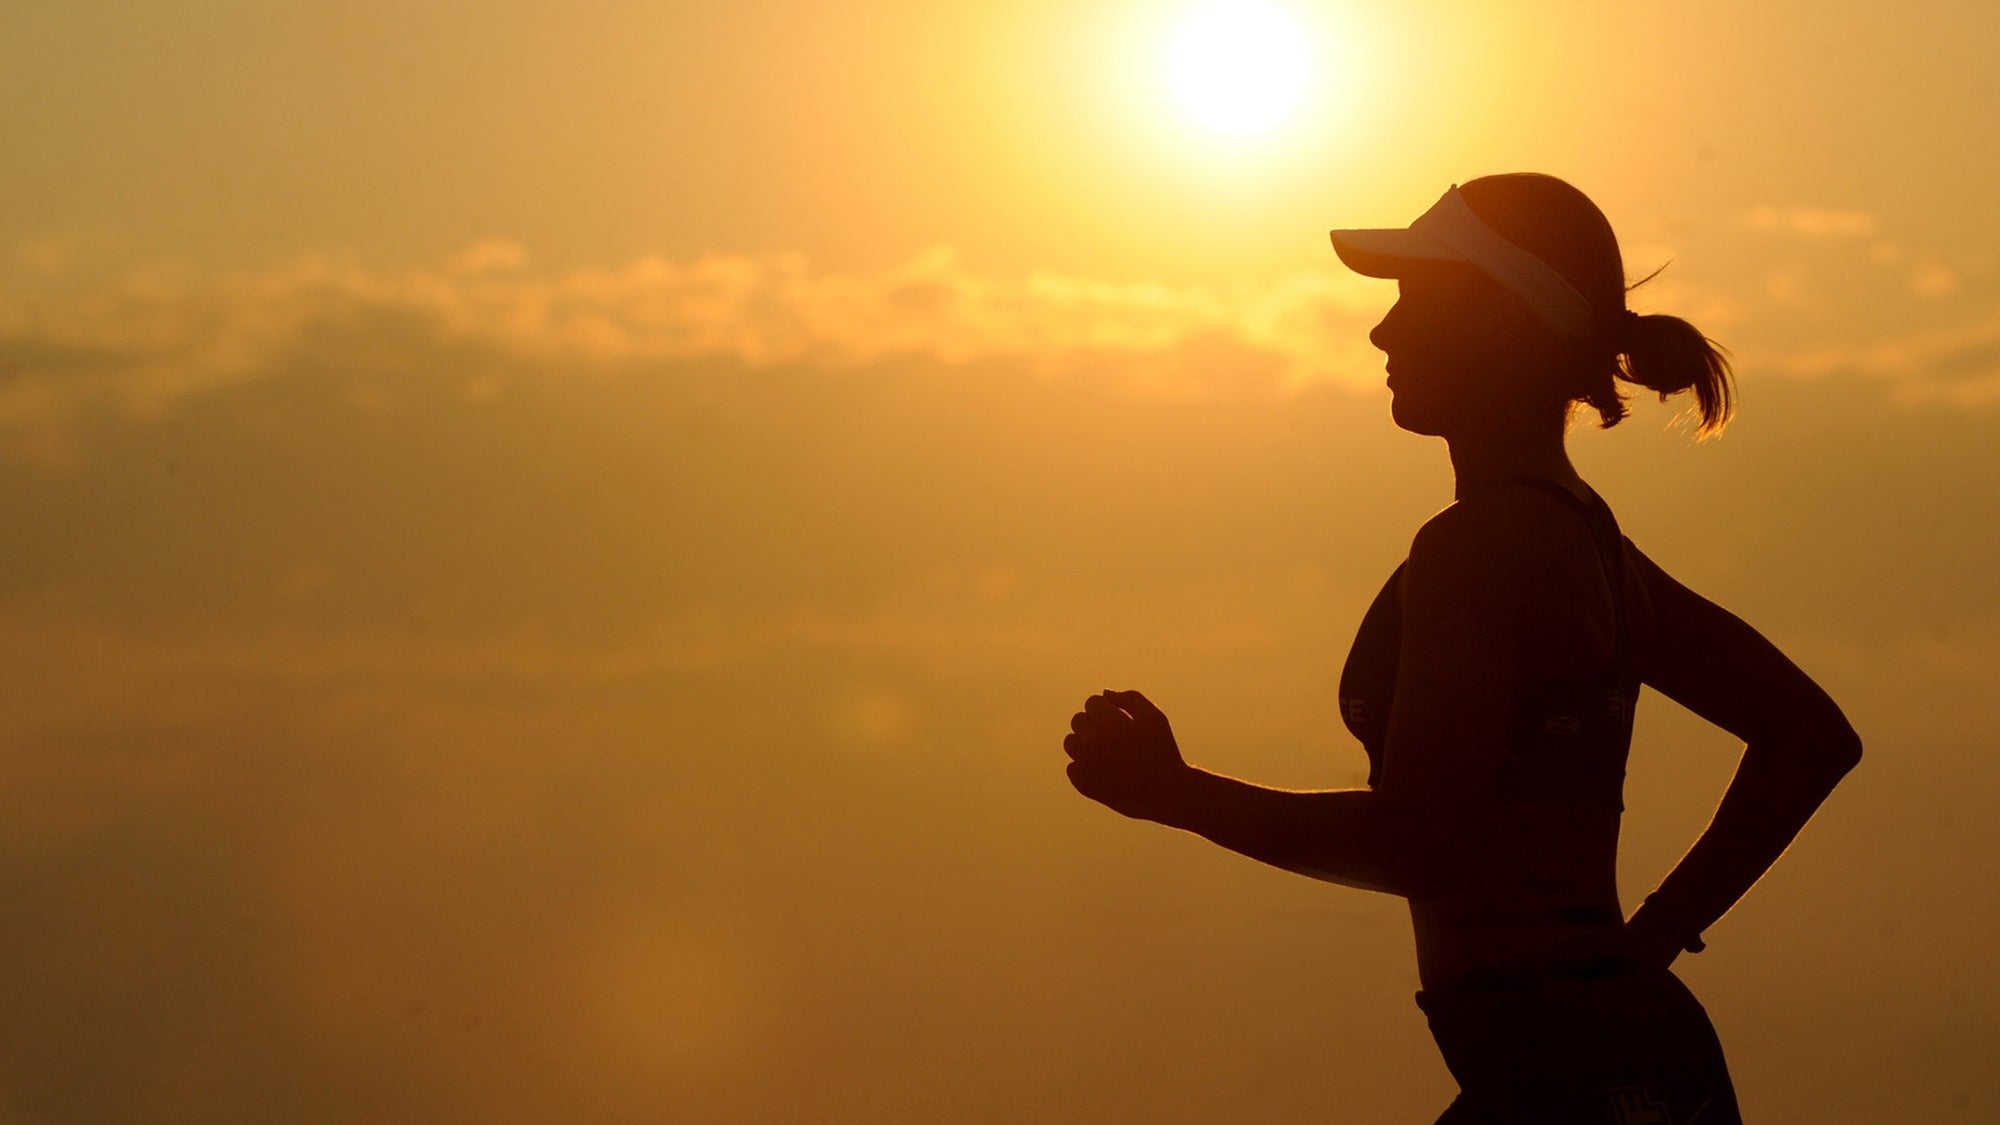 Run into 2023 With This Life-Changing Challenge: